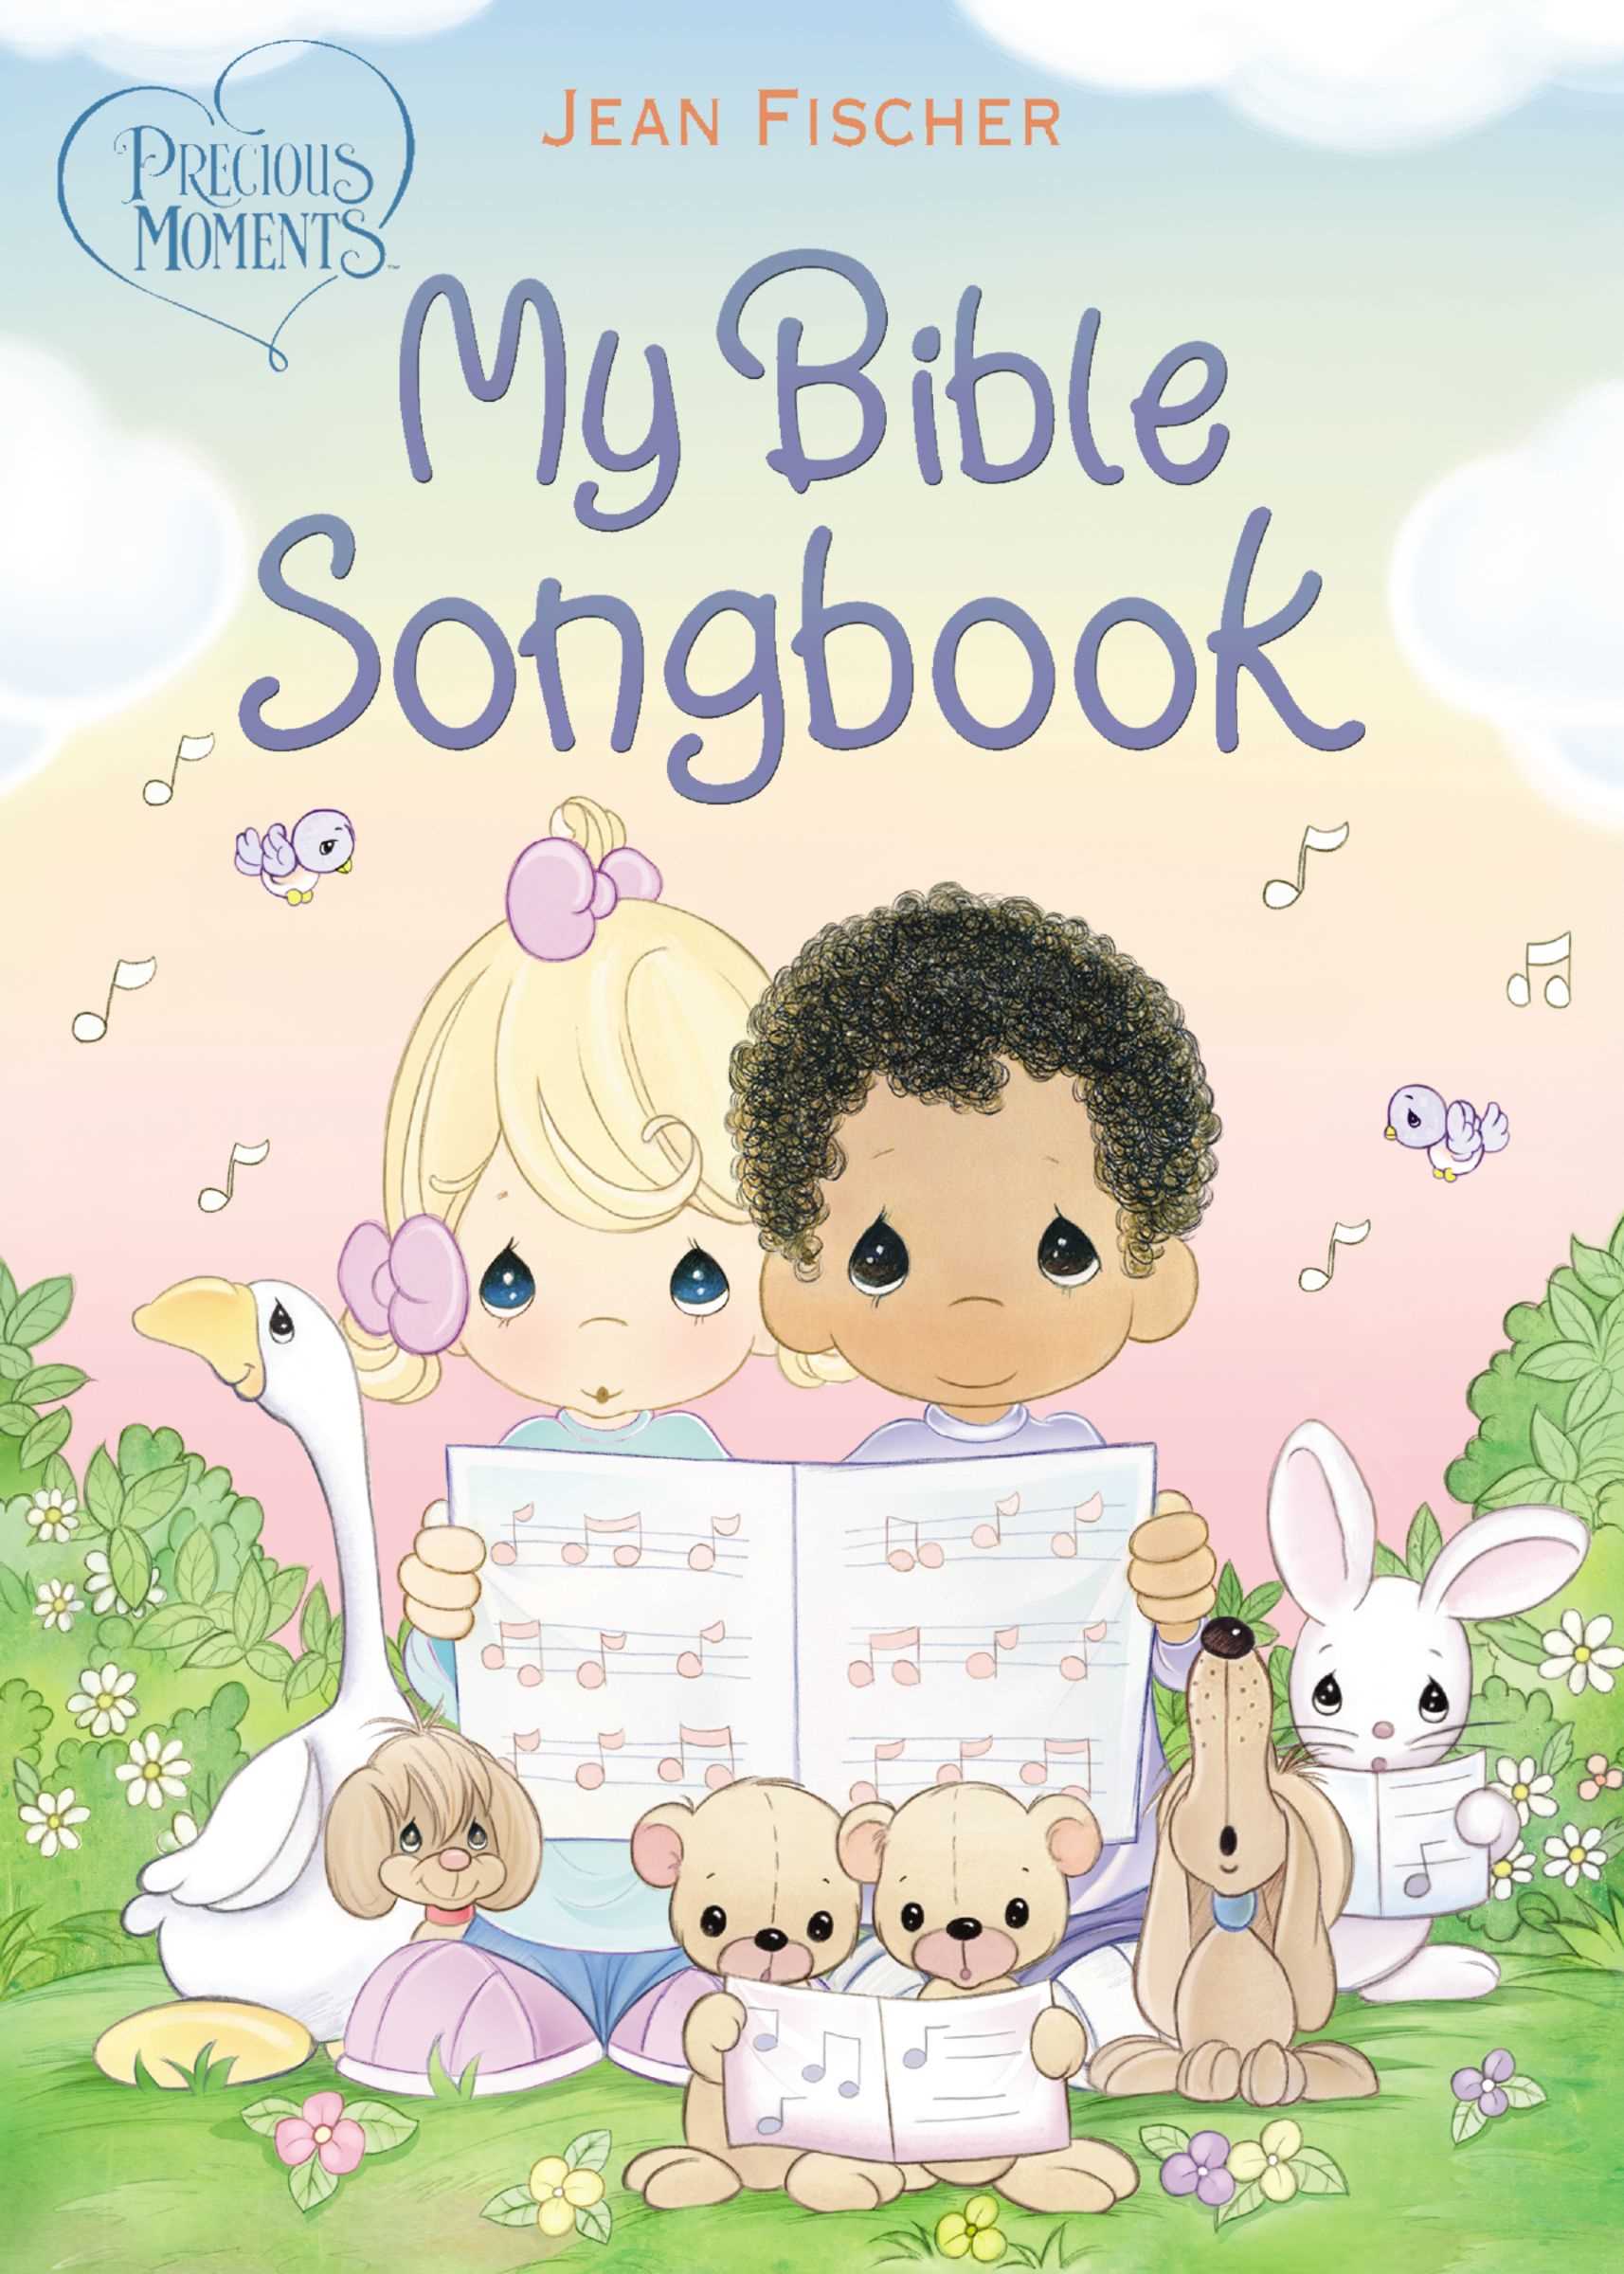 My Bible Songbook (Precious Moments)